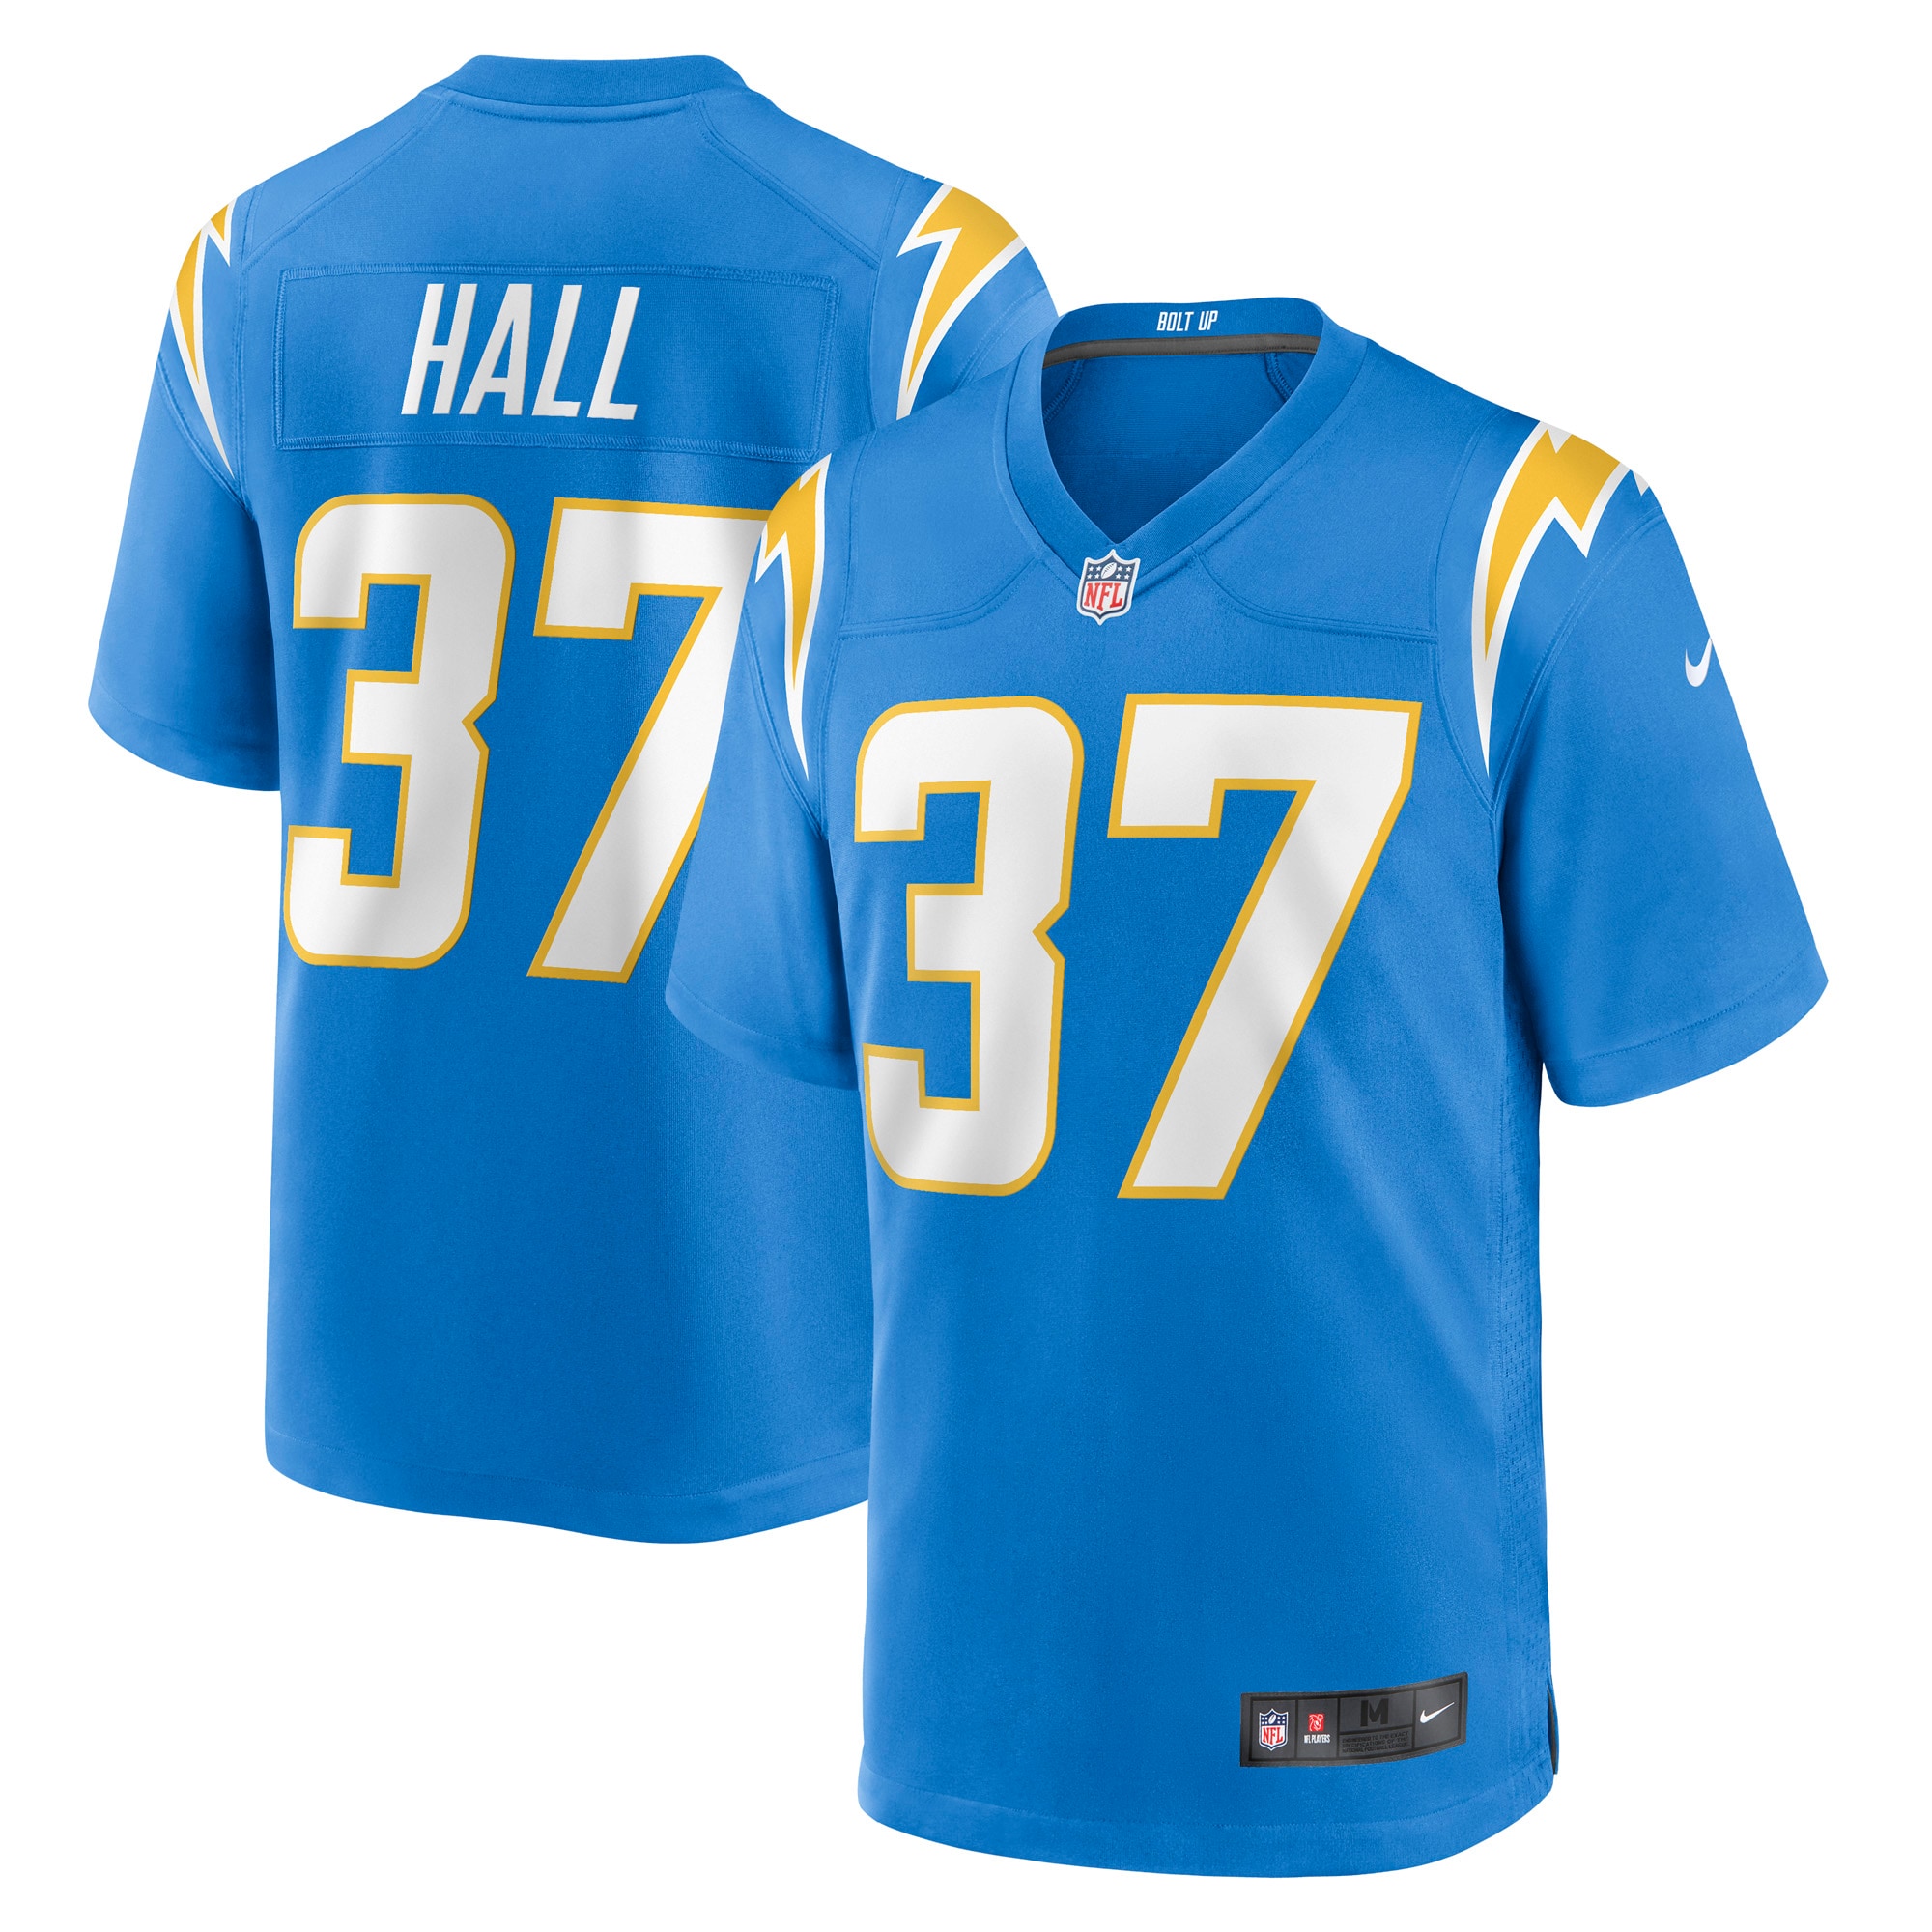 Men's Los Angeles Chargers Jerseys Powder Blue Kemon Hall Game Style